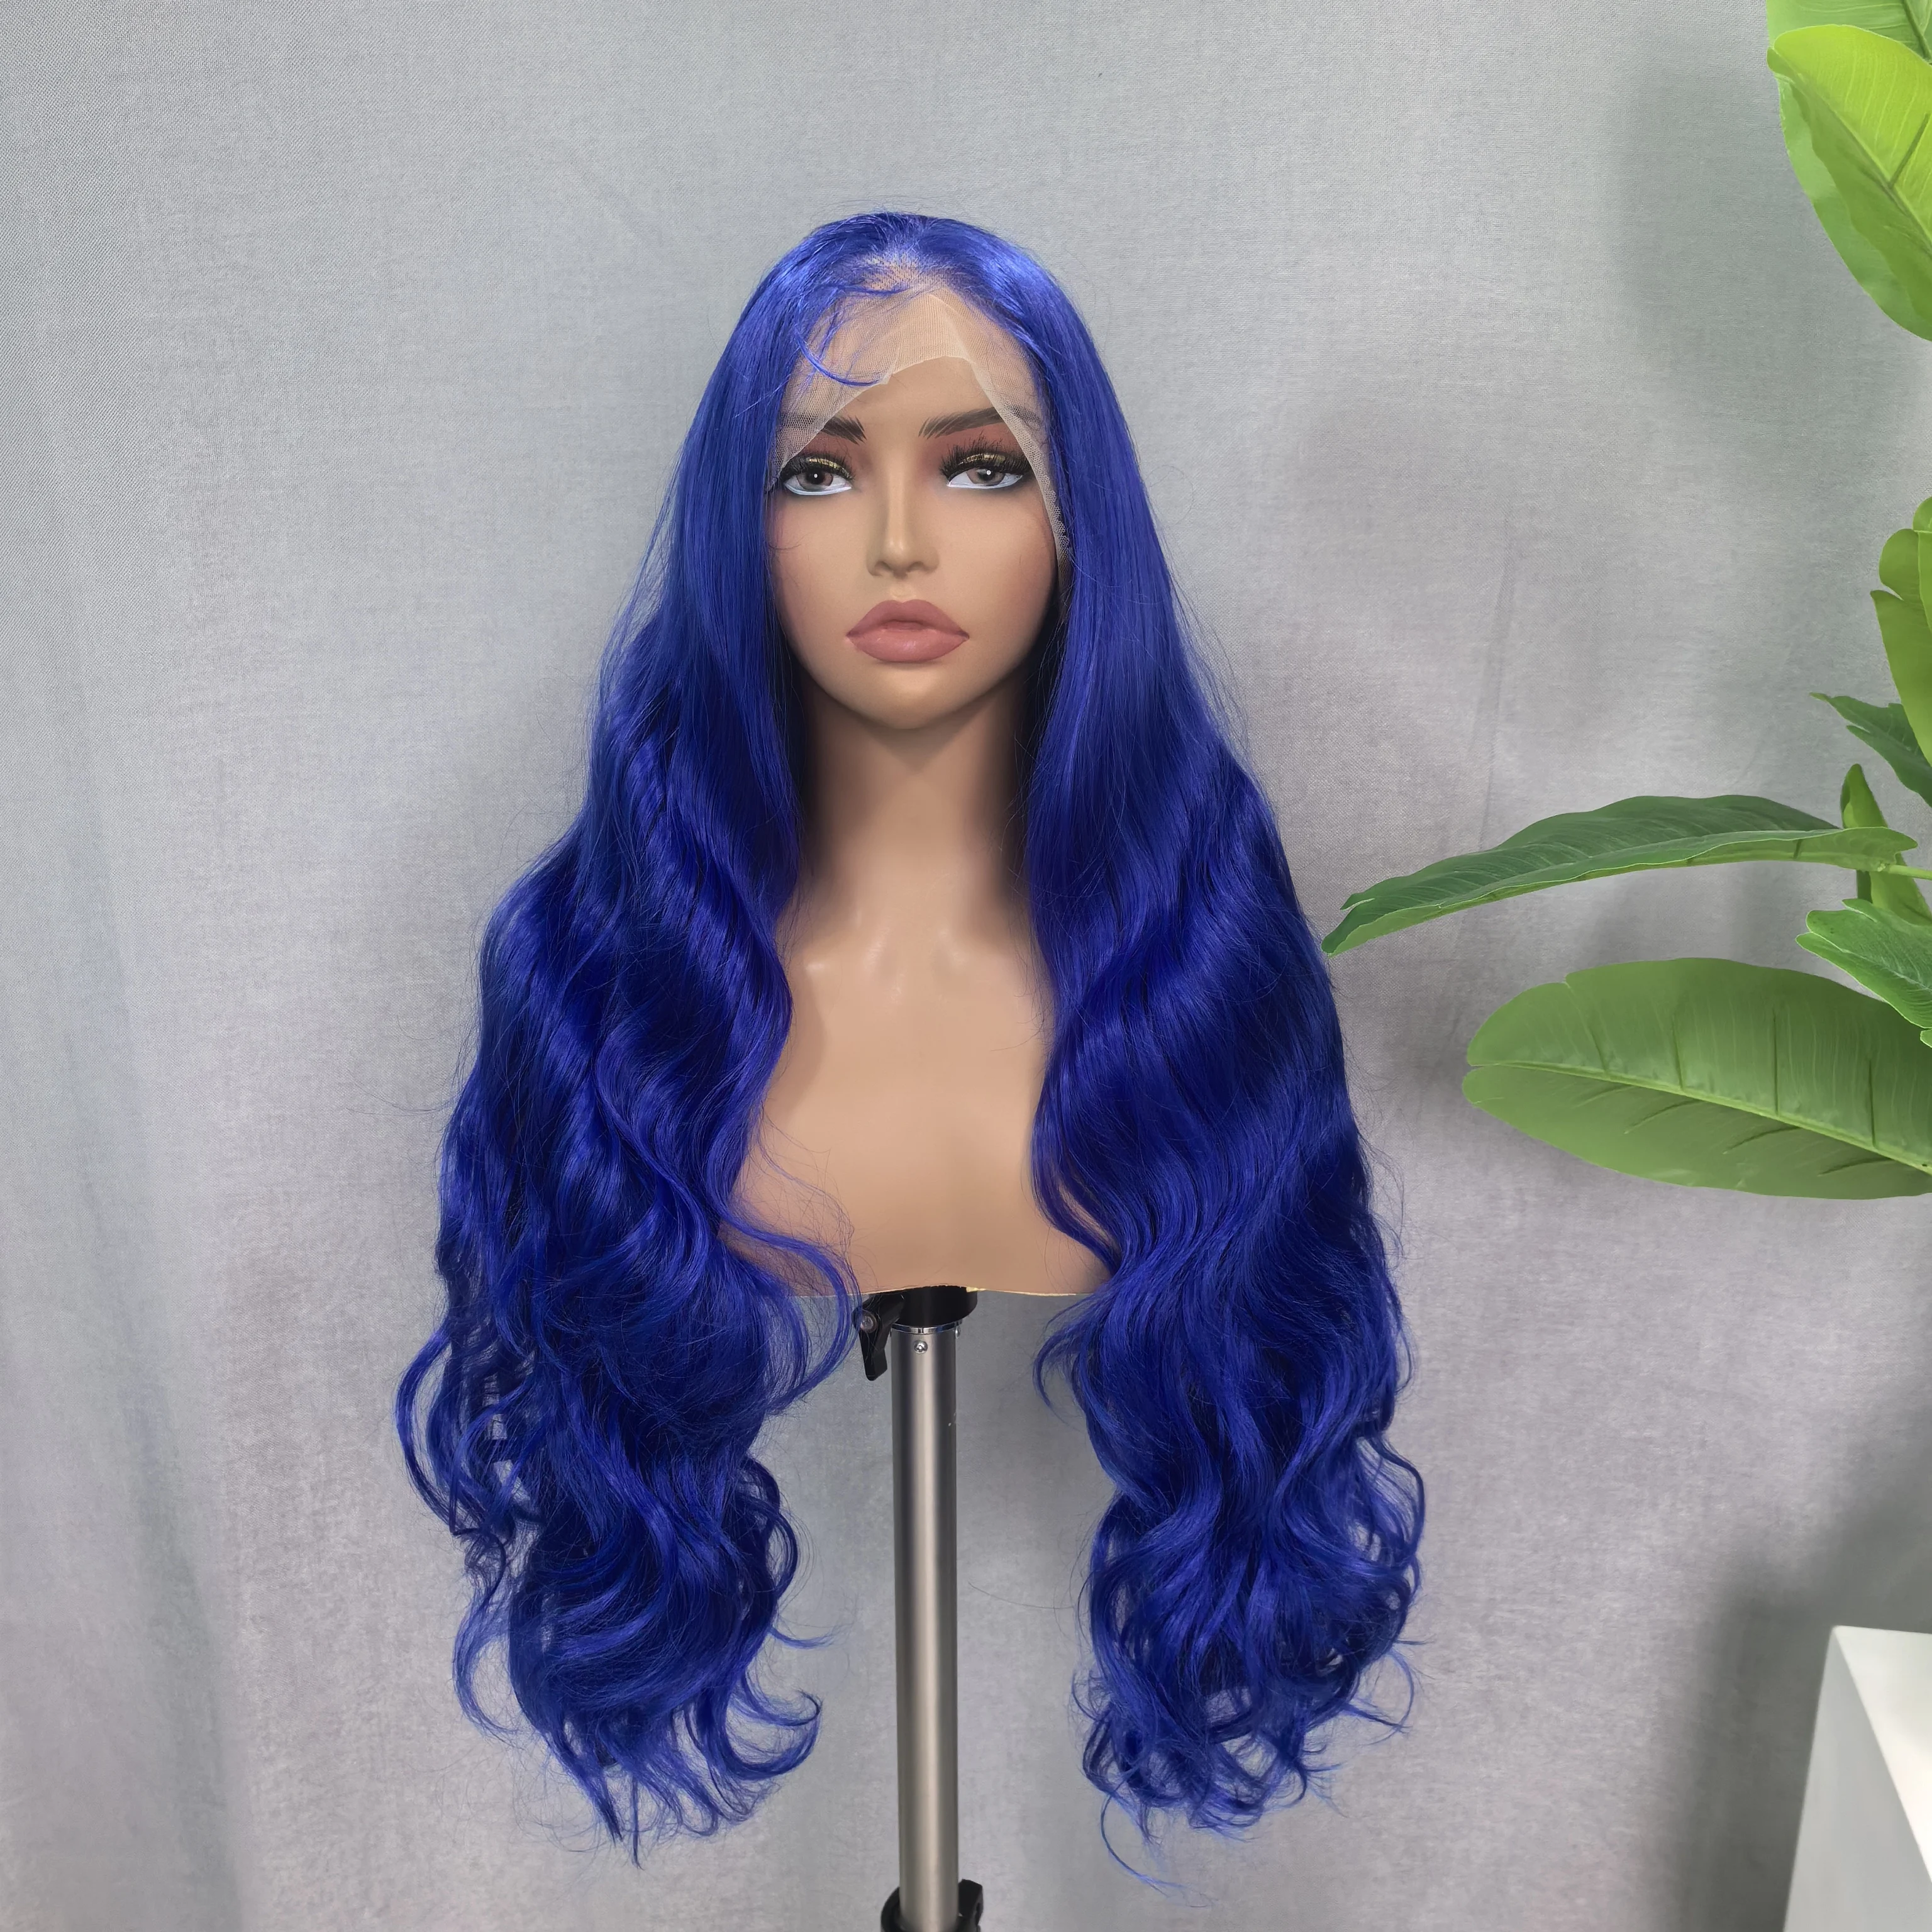 

X-TRESS Blue Free Part Wigs Long Wavy Natural Synthetic Transparent Lace Front Wigs for Black Women Daily Party Heat Resistant